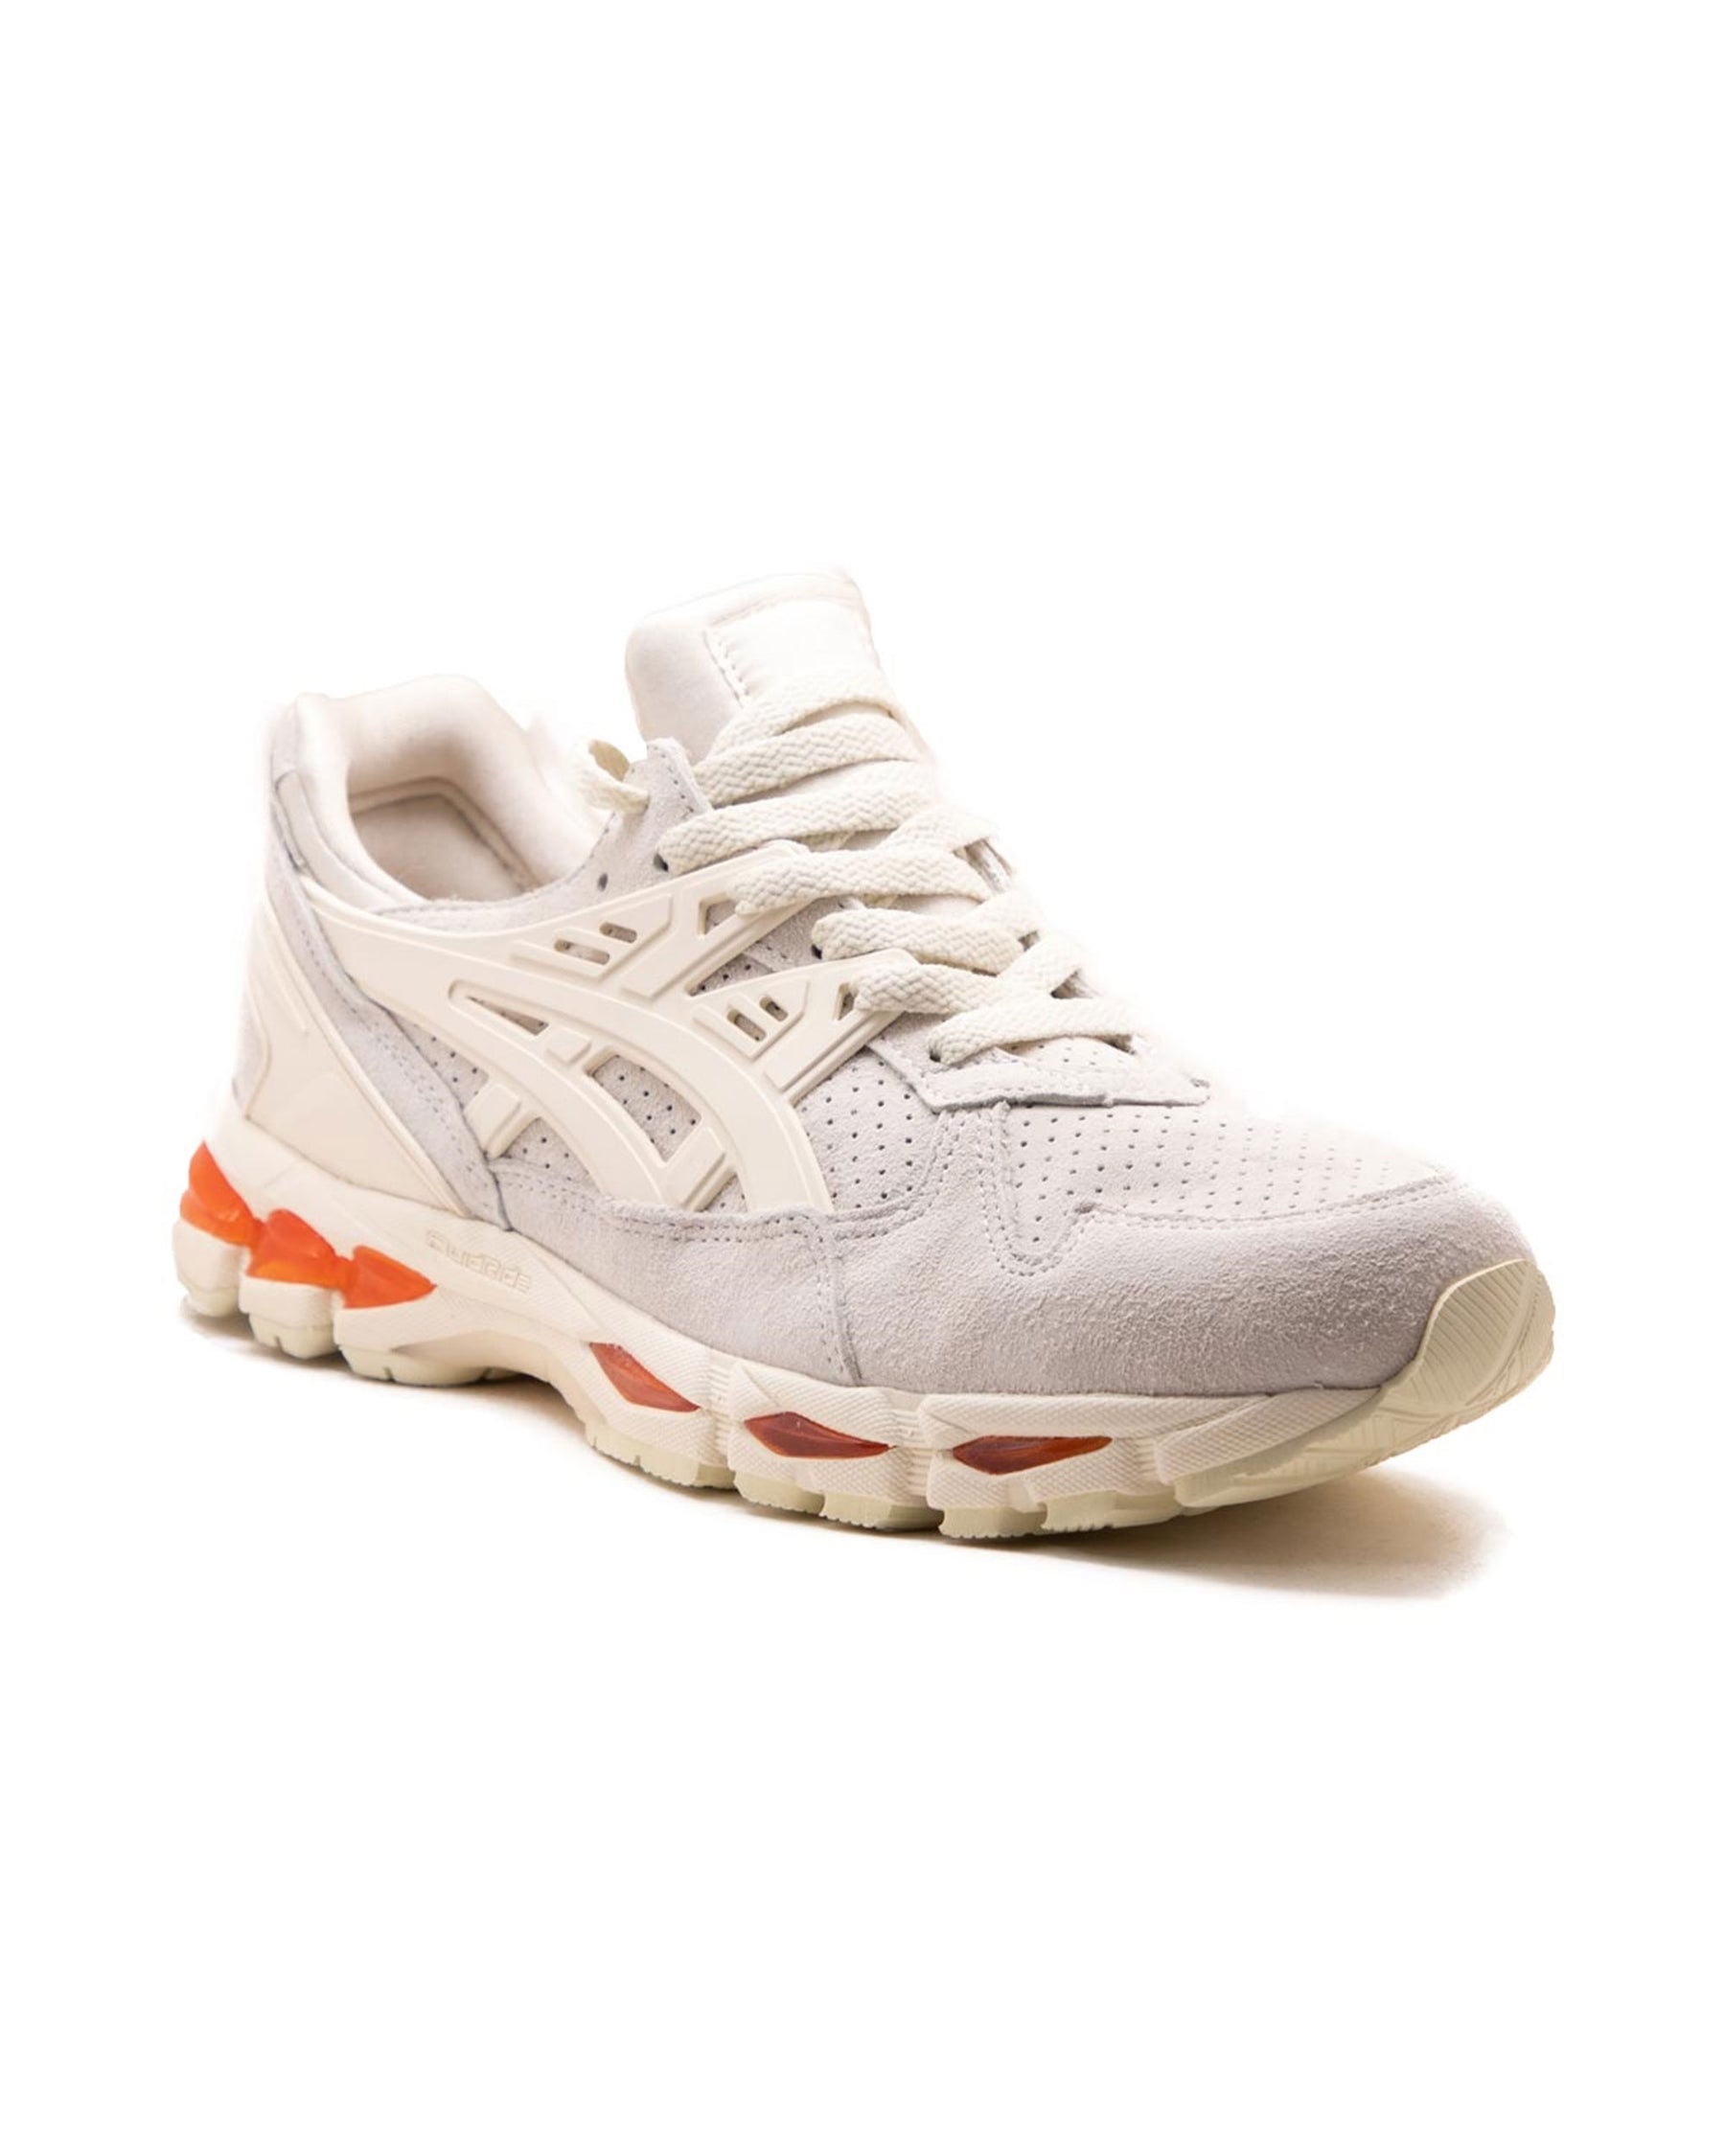 Asics Gel Kayano Trainer 21 Suede 1201A067-201